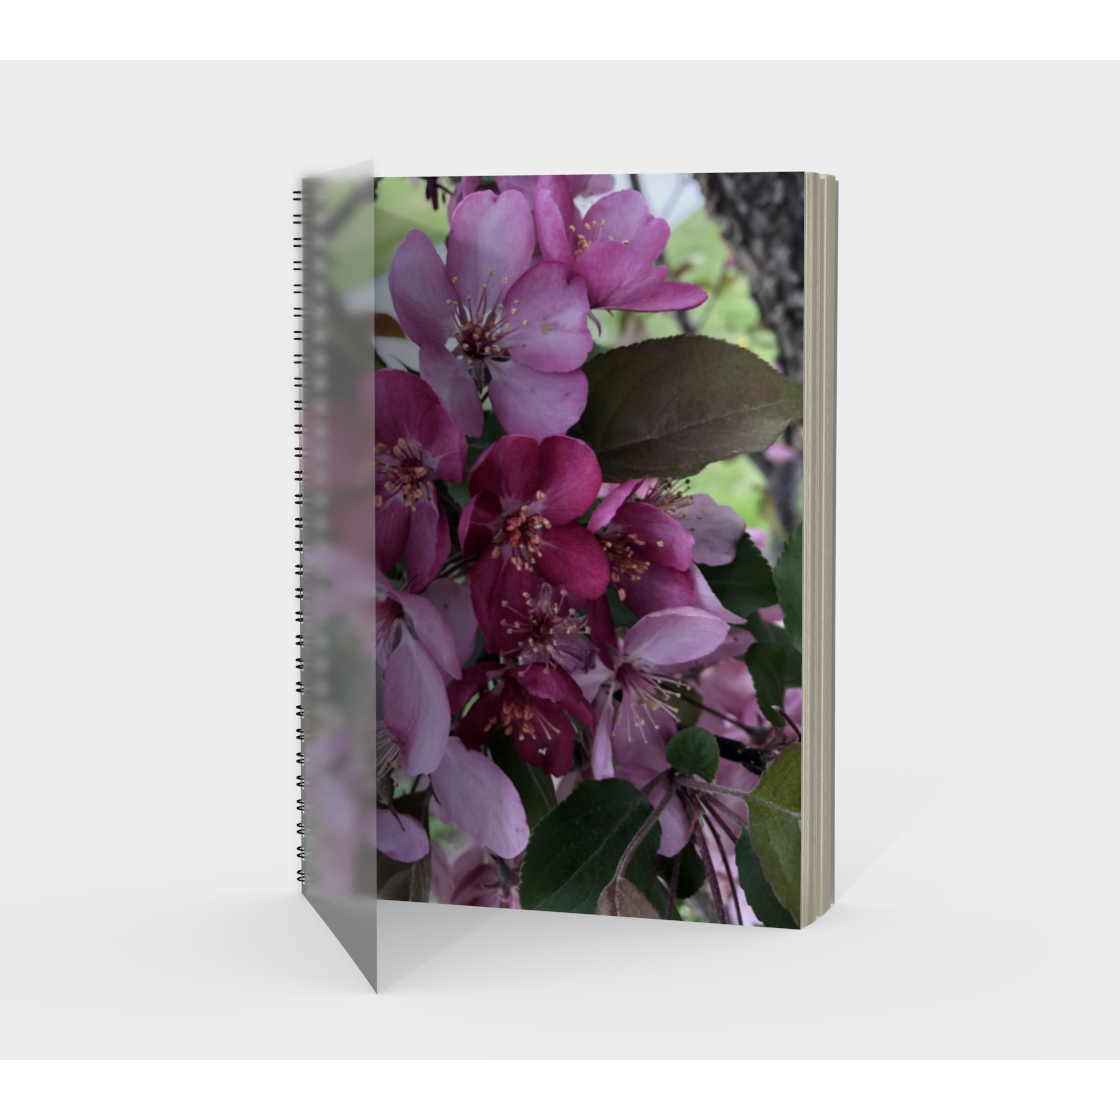 Notebook, Spiral-Bound, Custom Designed with our Flower Petal, Portrait, Front